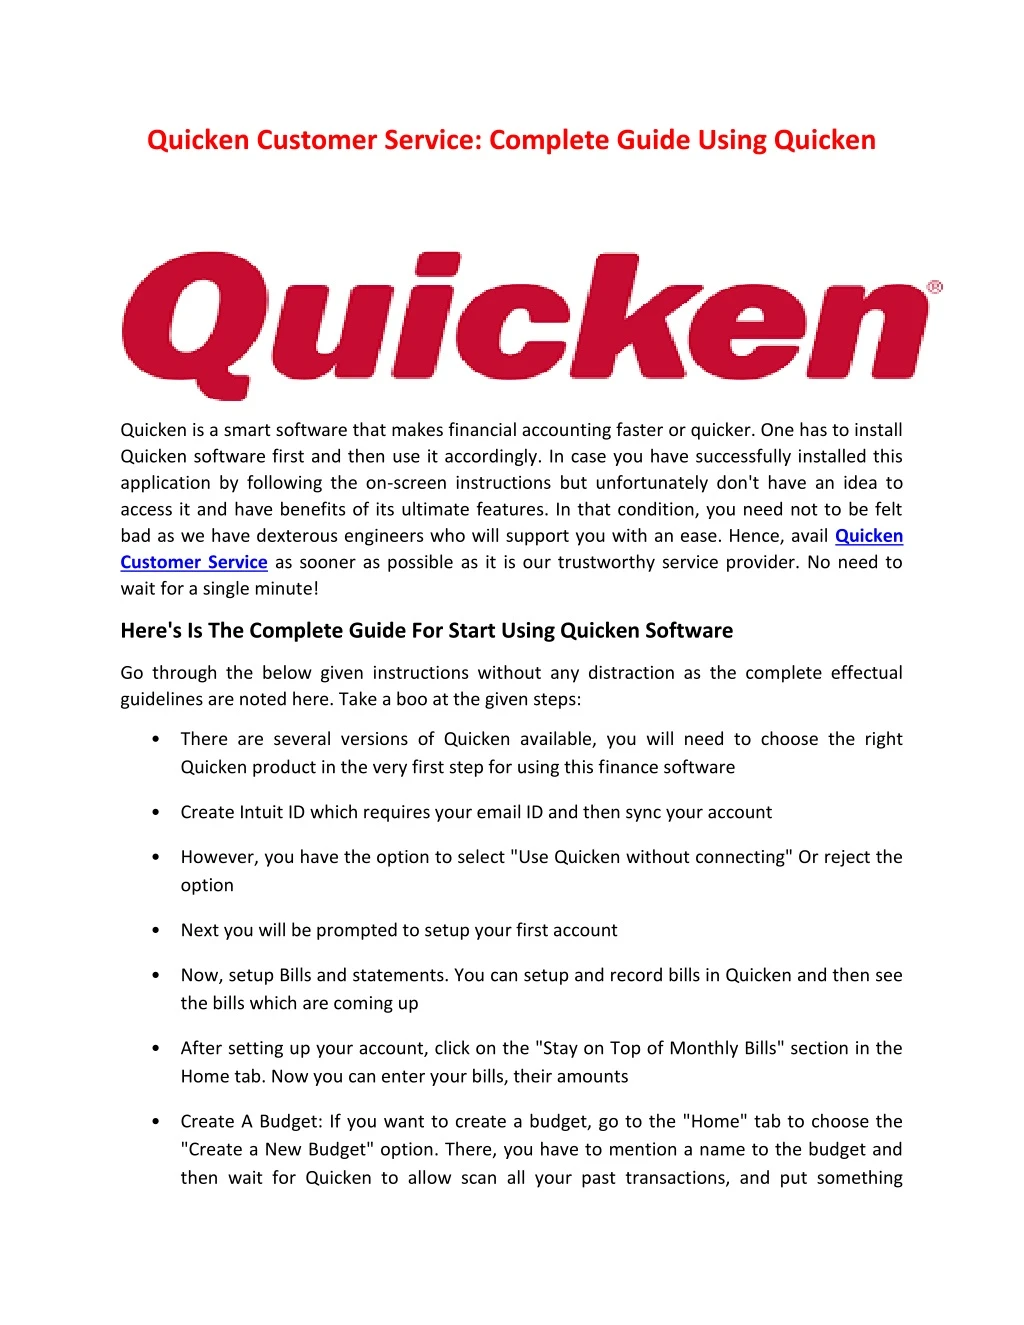 quicken customer service complete guide using